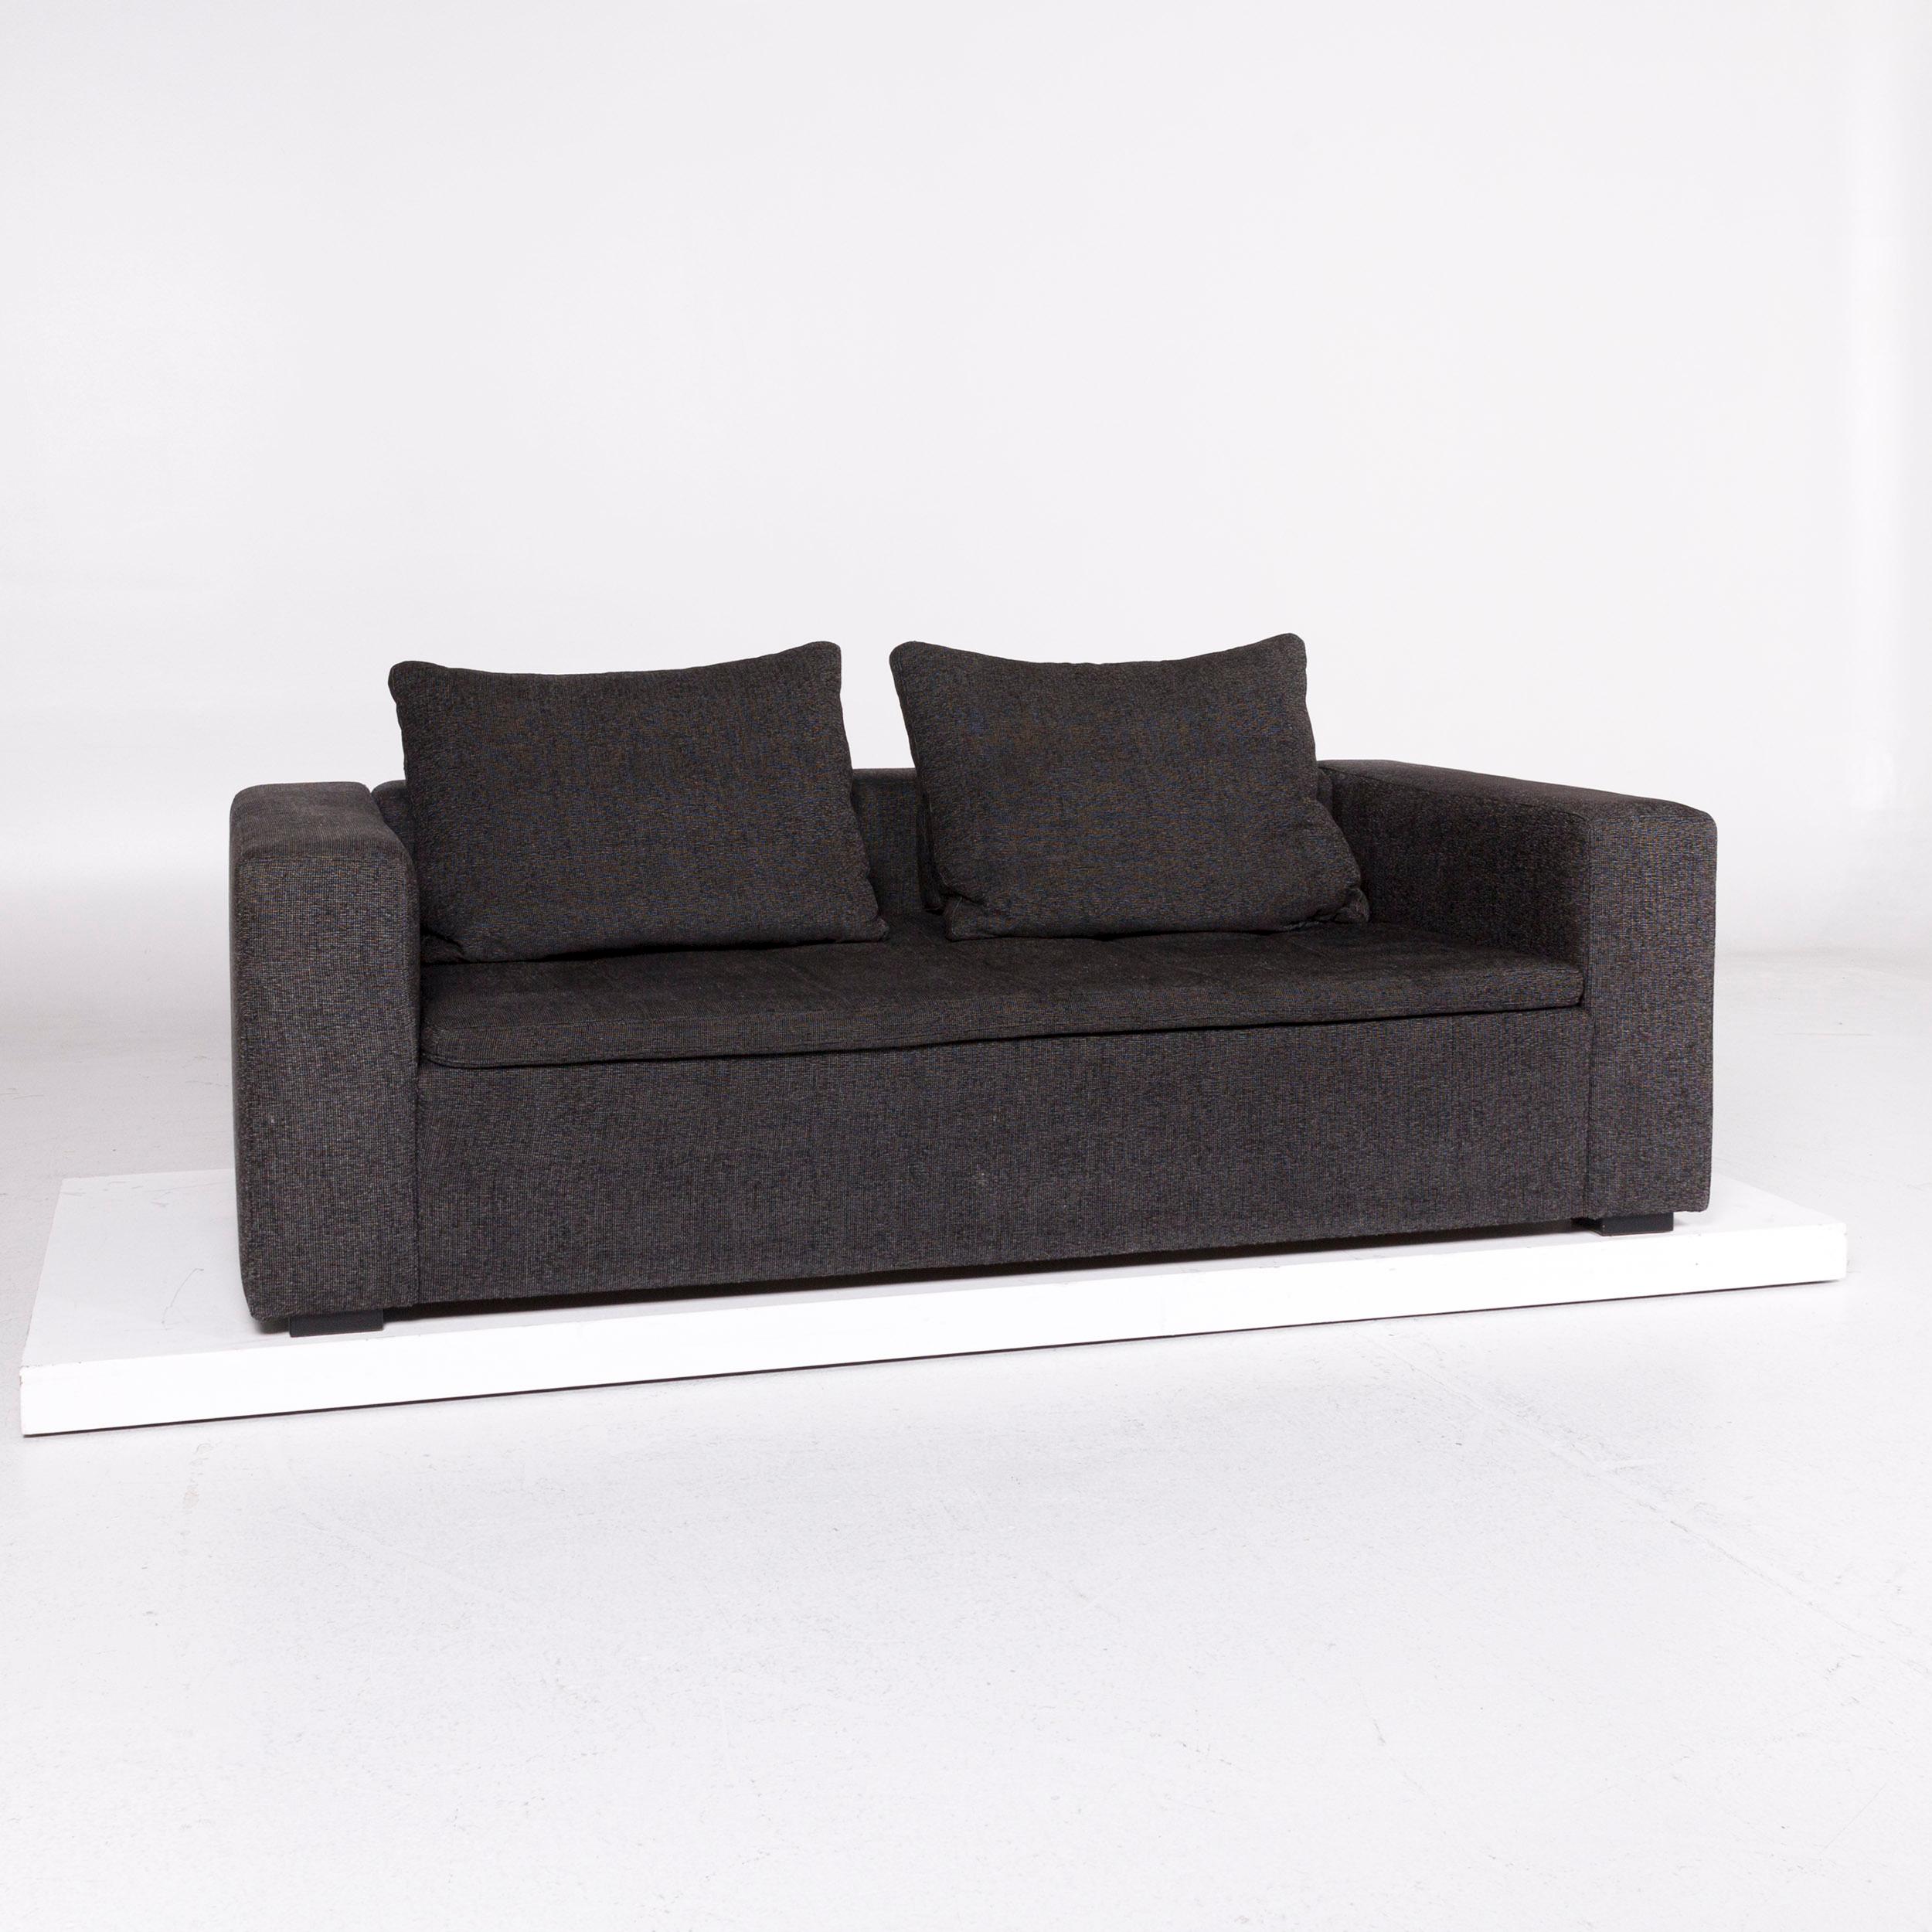 We bring to you a BoConcept Mezzo fabric sofa set anthracite black gray 1 two-seat 1 armchair.

 Product measurements in centimeters:
 
Depth 104
Width 204
Height 80
Seat-height 39
Rest-height 60
Seat-depth 52
Seat-width 159
Back-height